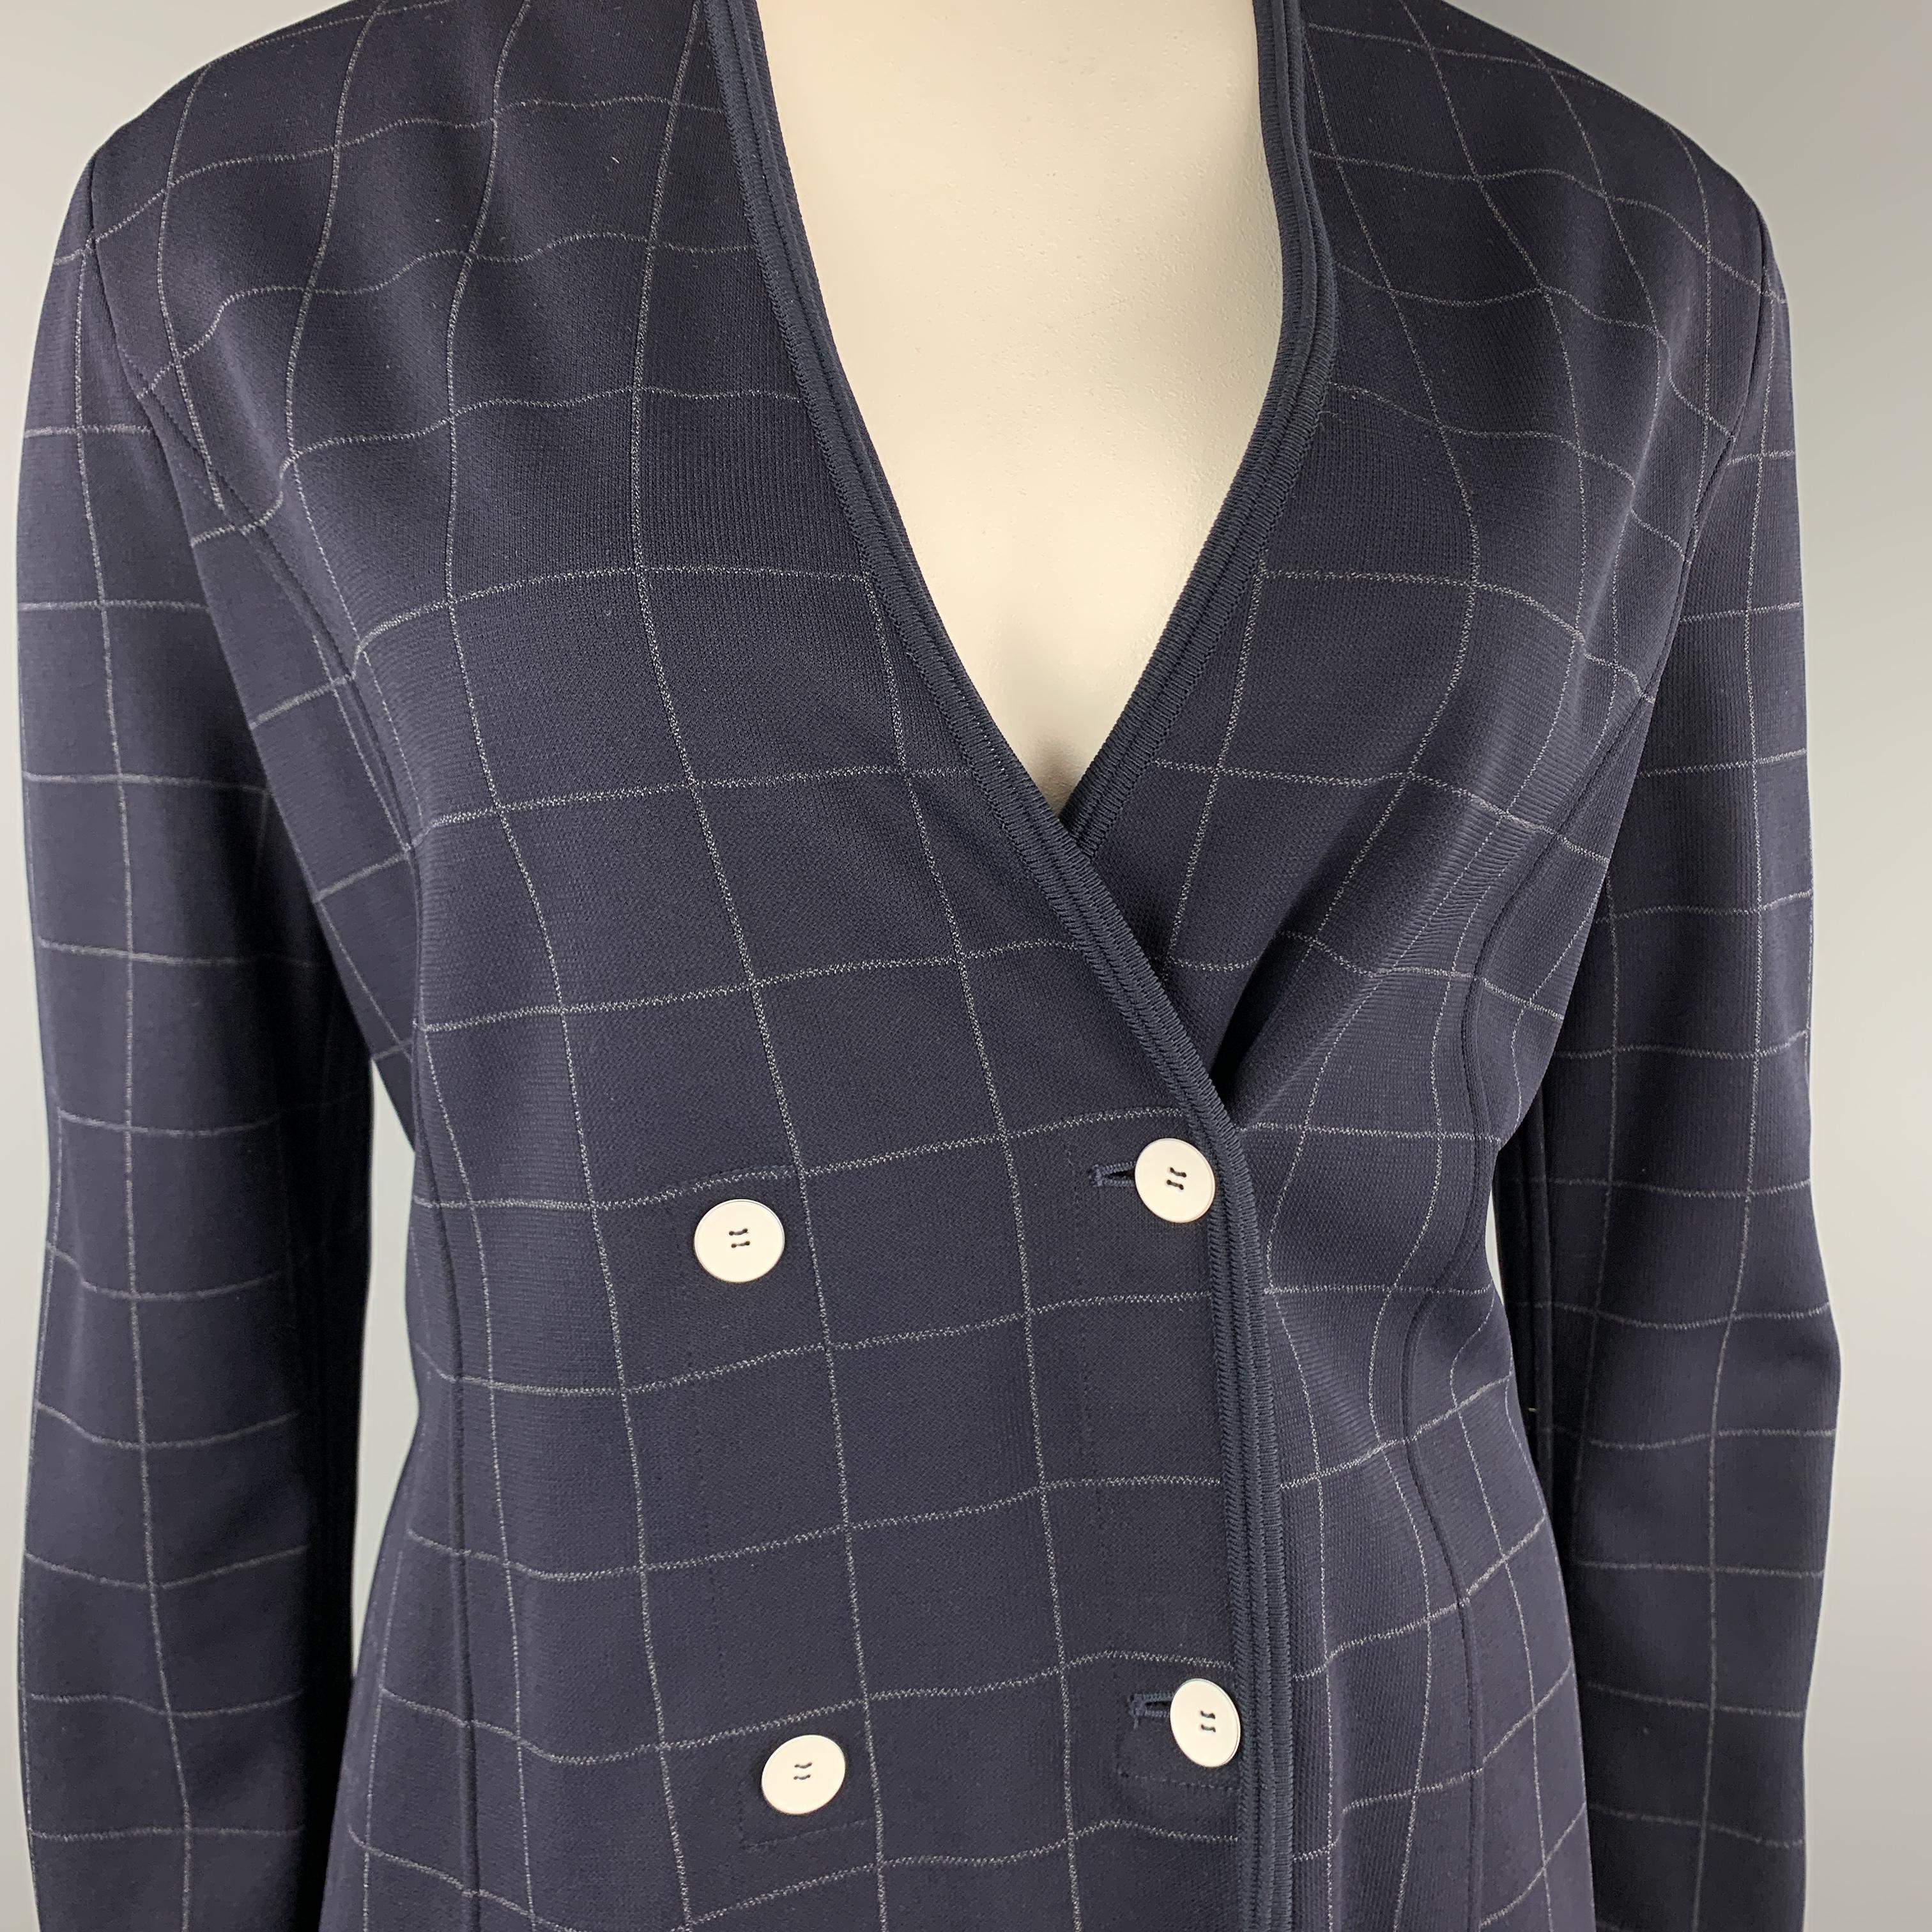 GIORGIO ARMANI cardigan jacket come sin navy and gray windowpane print viscose blend knit with a deep v neck and double breasted button closure. Made in Italy.

Excellent Pre-Owned Condition.
Marked: IT 48

Measurements:

Shoulder: 18.5 in.
Bust: 42